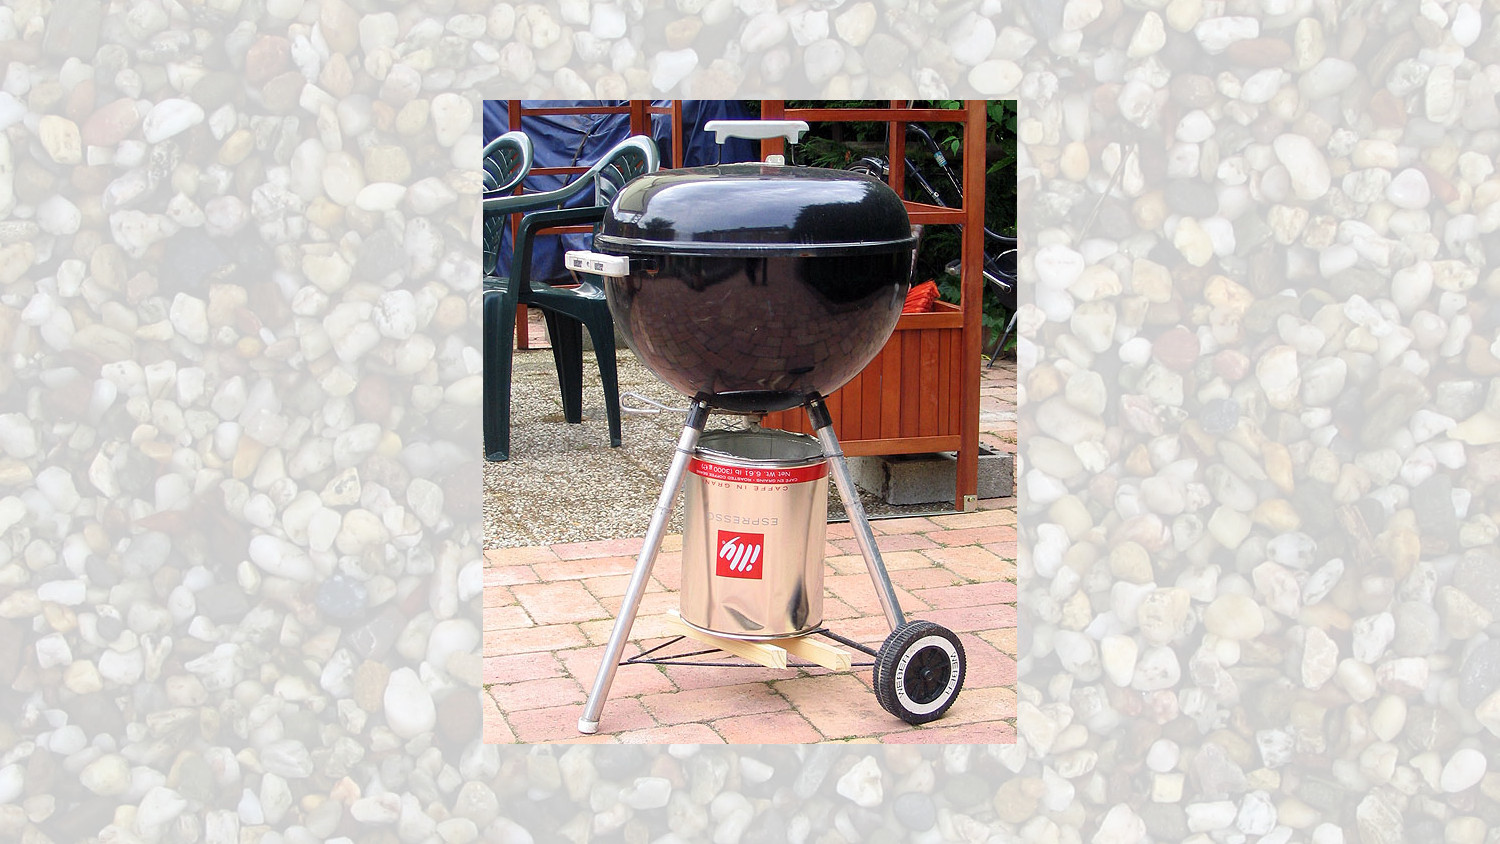 Weber barbecue with large Illy can for ash collection